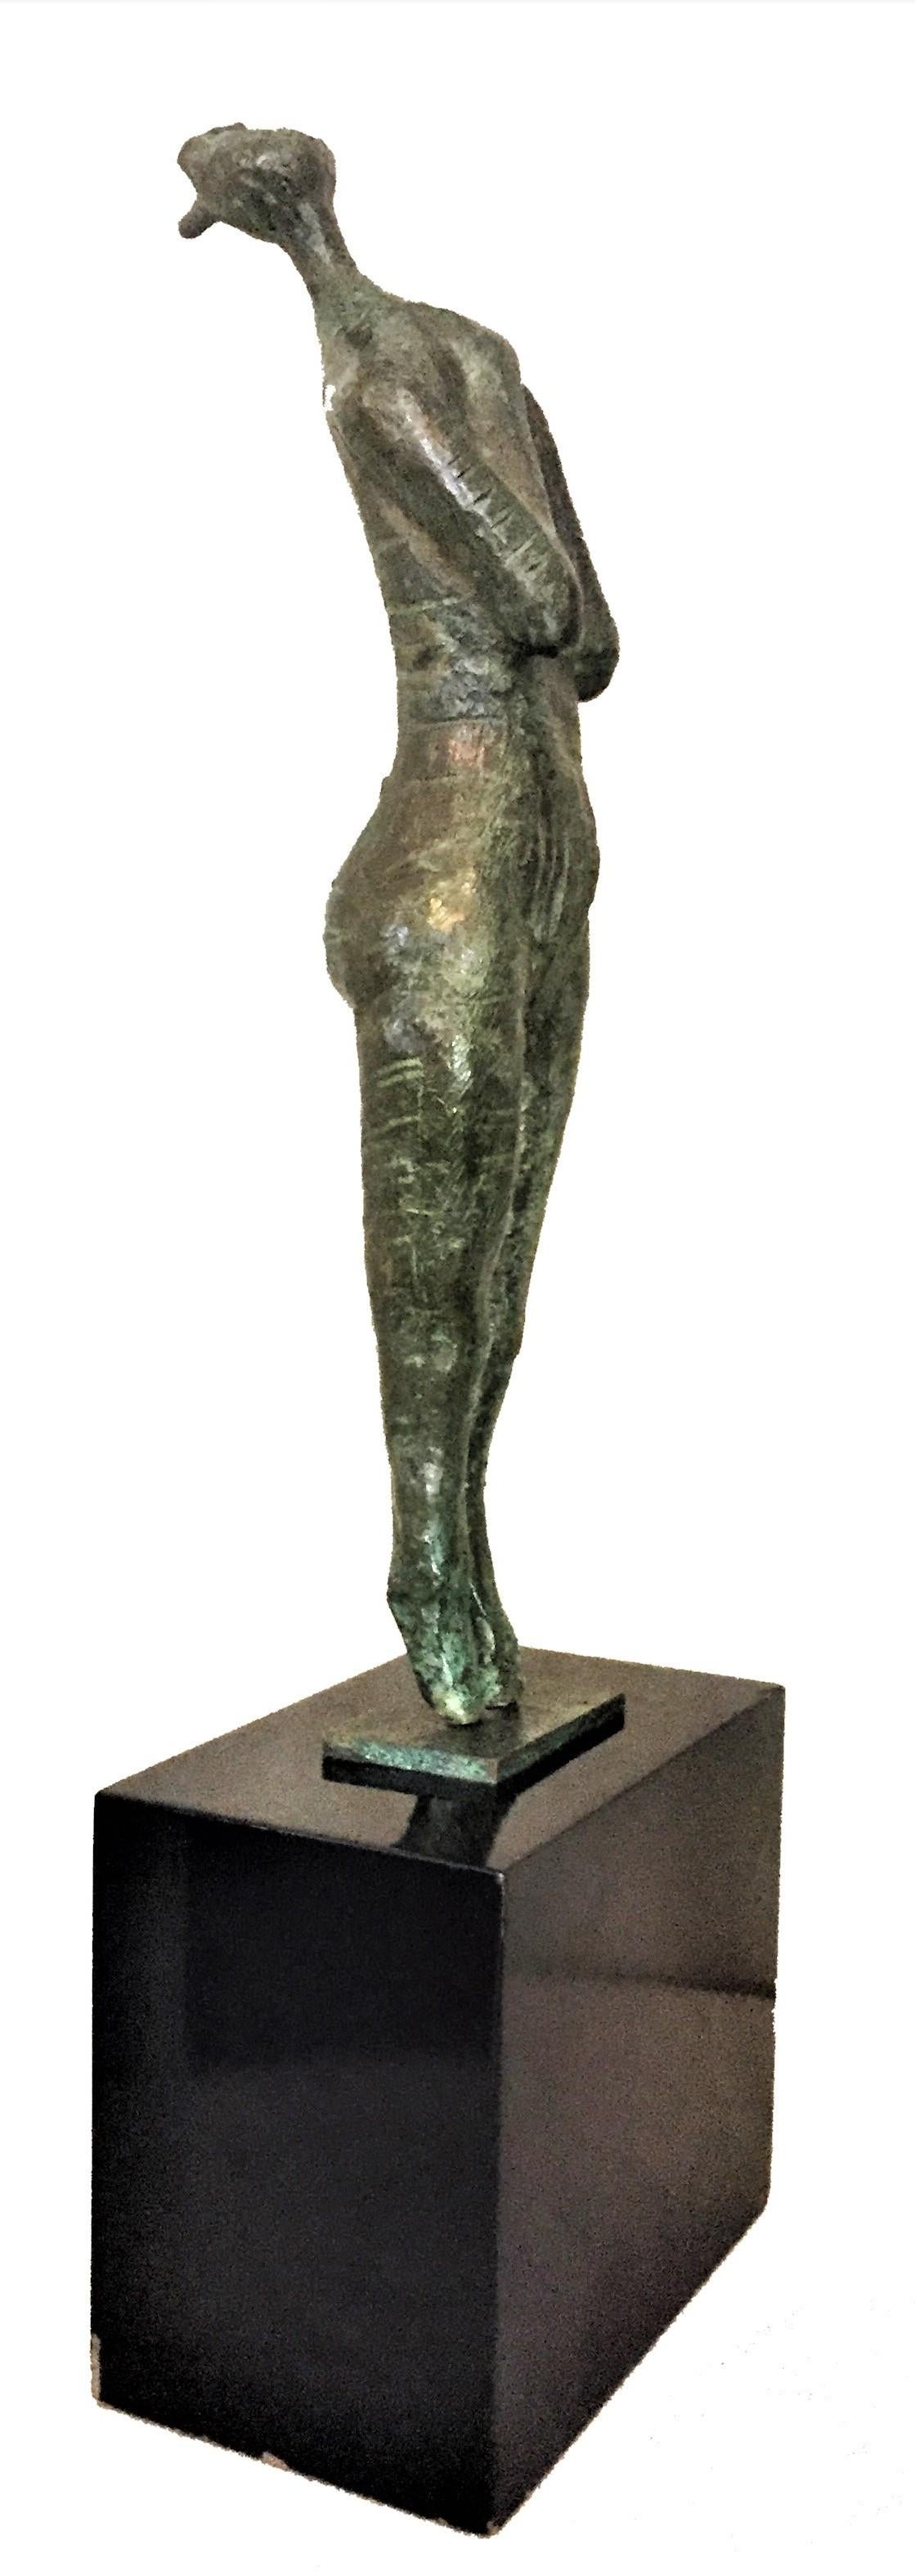 Signed “Igor ’67”, this beautifully cast patinated bronze sculpture depicts a woman on tiptoe, arms folded across h?? chest, head up and screaming with all her might, mouth wide open. Original lacquered wood base.

Dimensions:
Height (max):